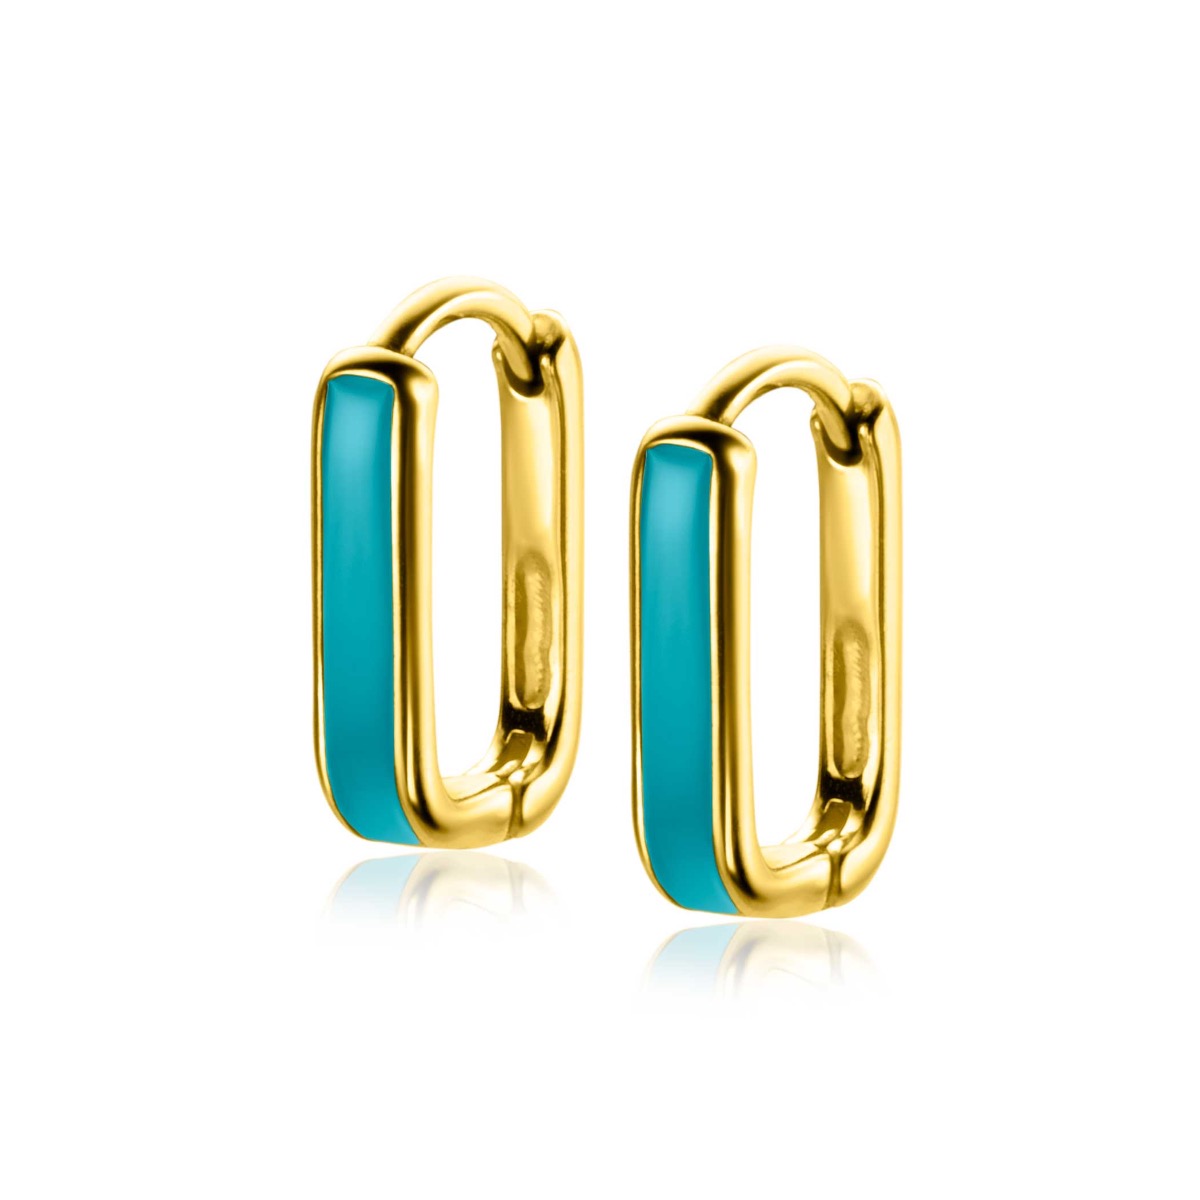 15mm ZINZI Gold Plated Sterling Silver Hoop Earrings Rectangular Shape with Turquoise Enamel 15x4mm ZIO2339T